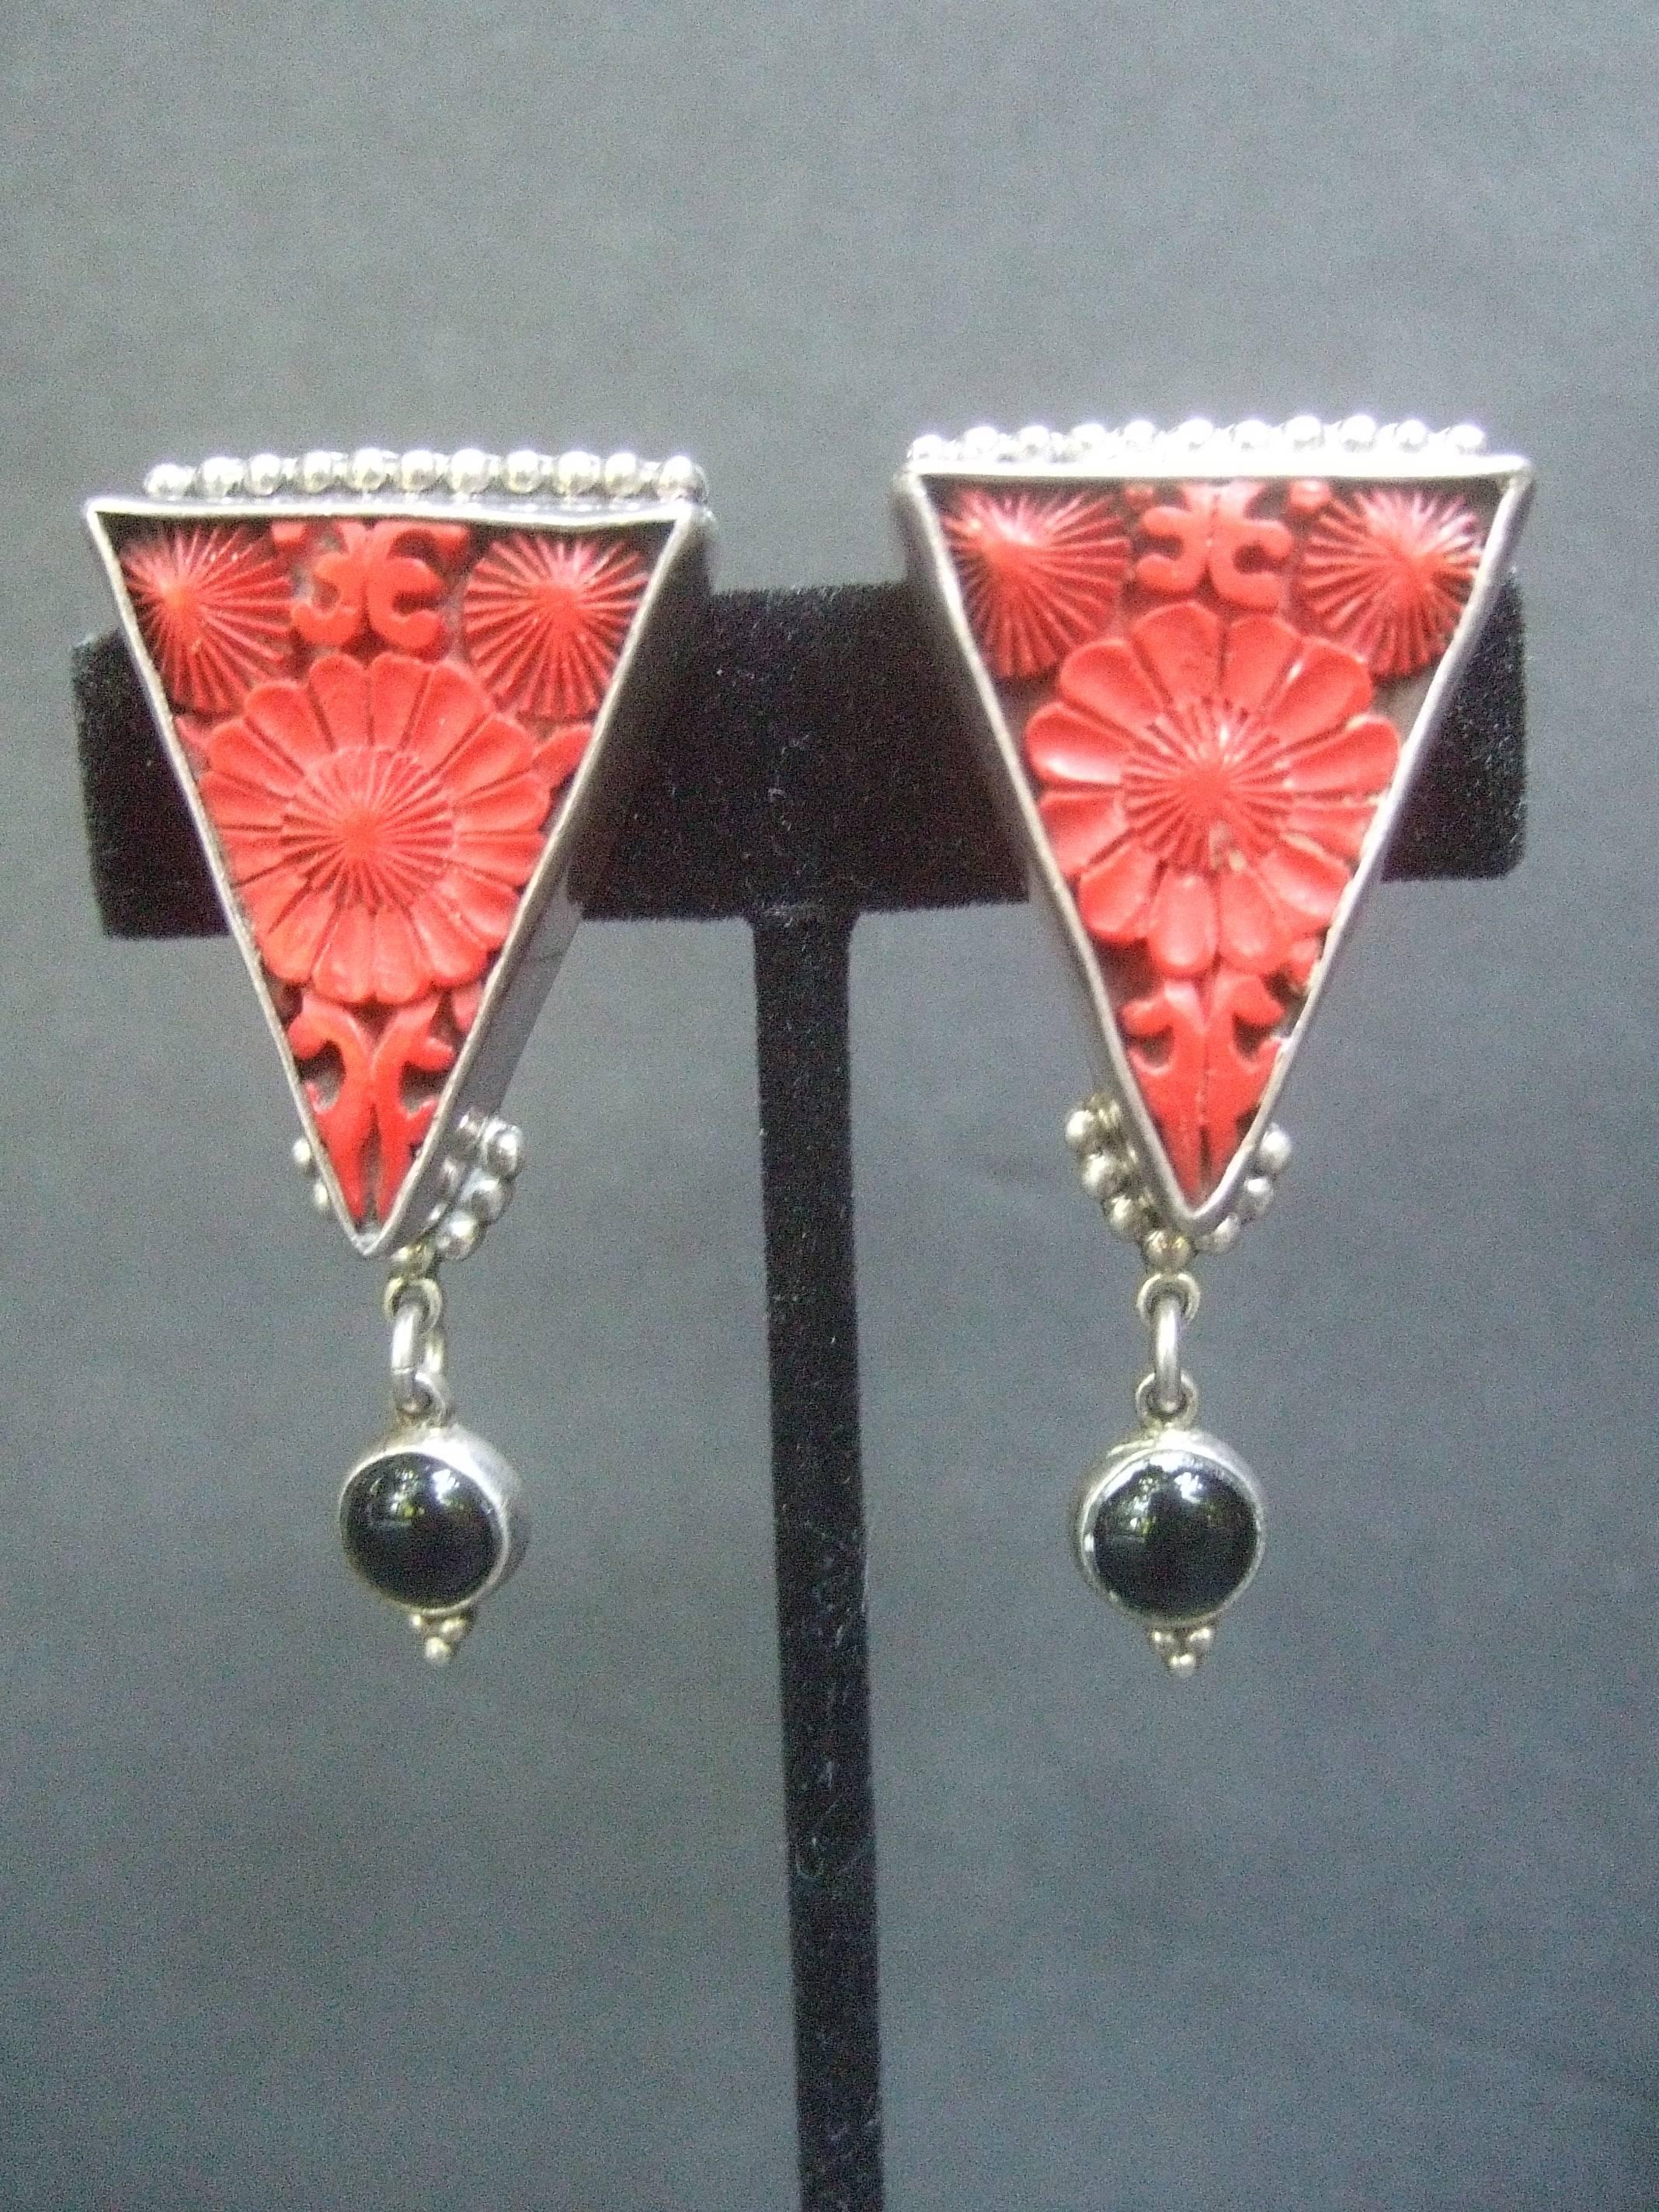 Rare carved coral and jet sterling artisan earrings 
The handmade artisan clip on earrings are designed
with intricately carved coral inset tiles with floral motifs 

Dangling from the triangular sterling bezels 
are small smooth round jet glass